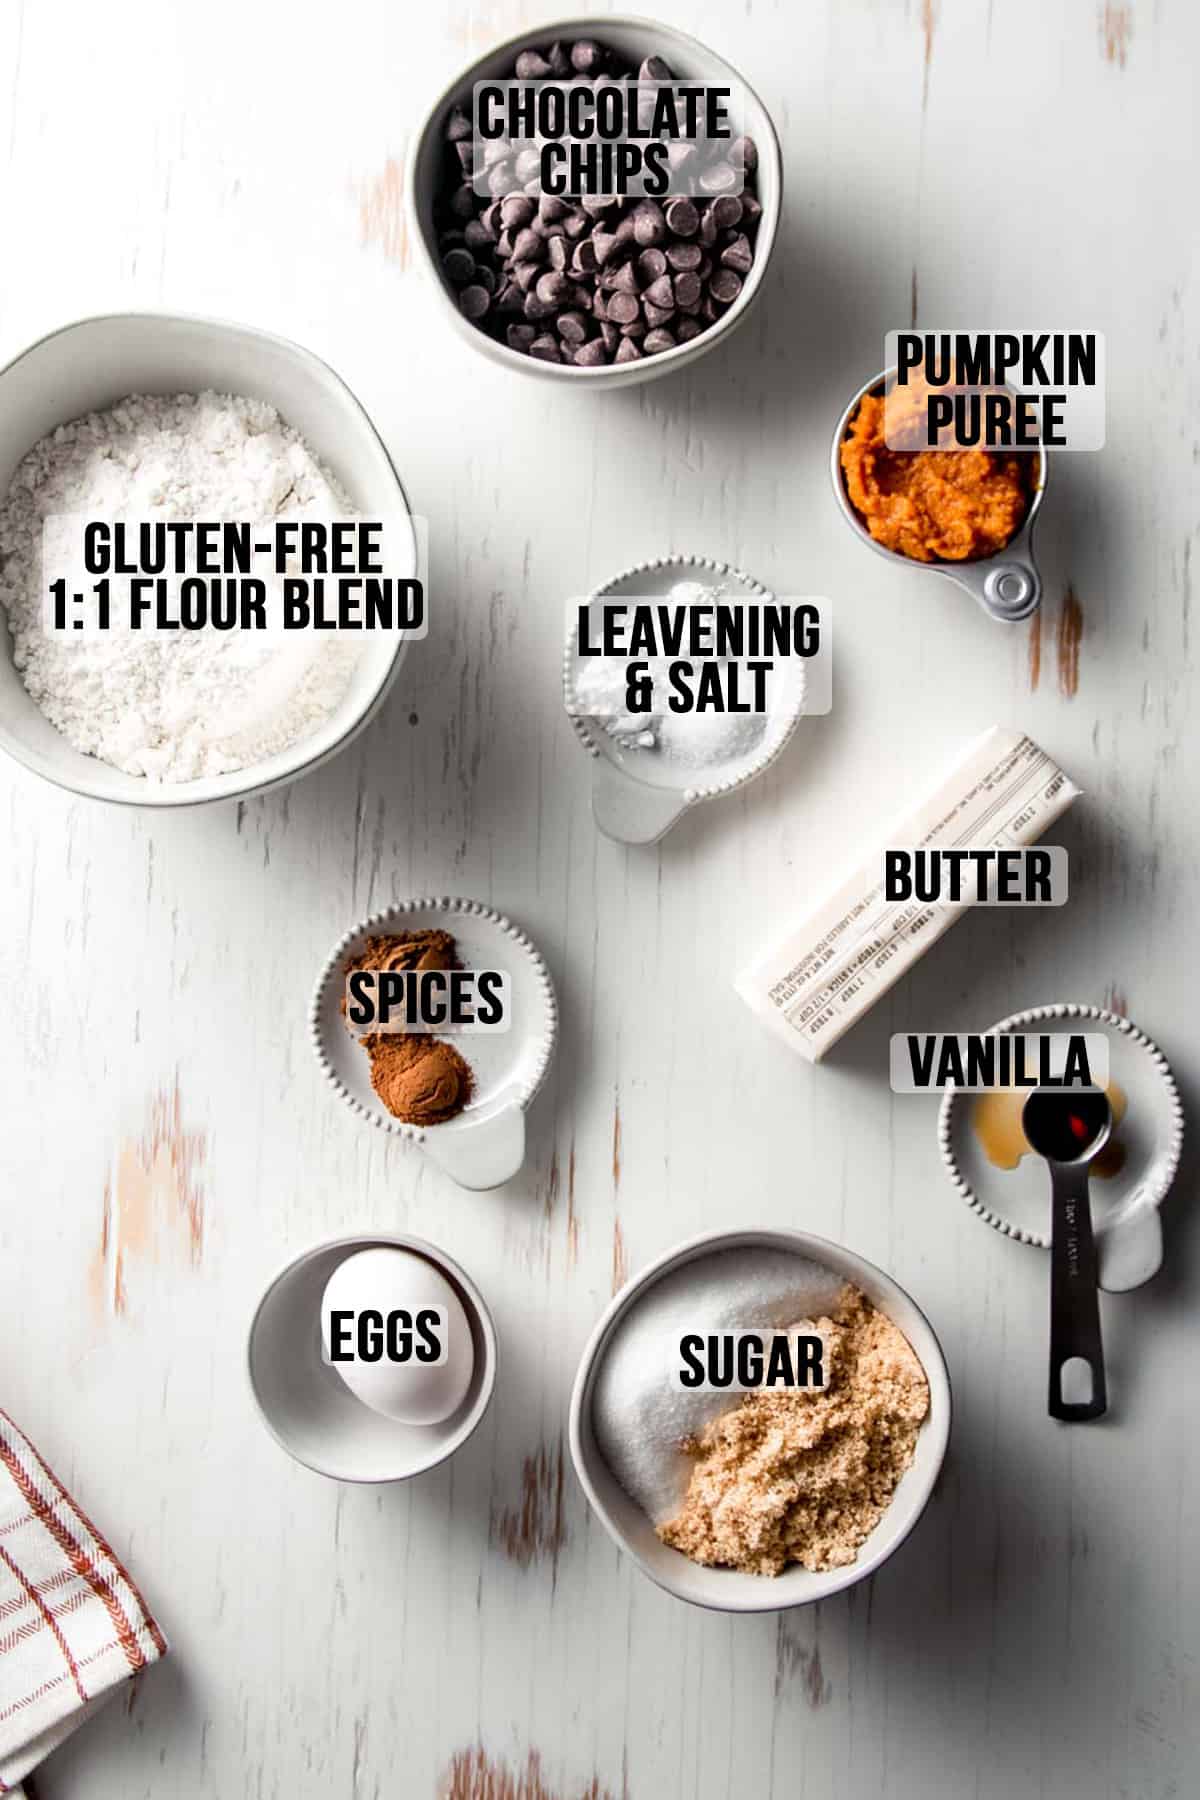 Labeled ingredients laid out in bowls on white wooden surface.